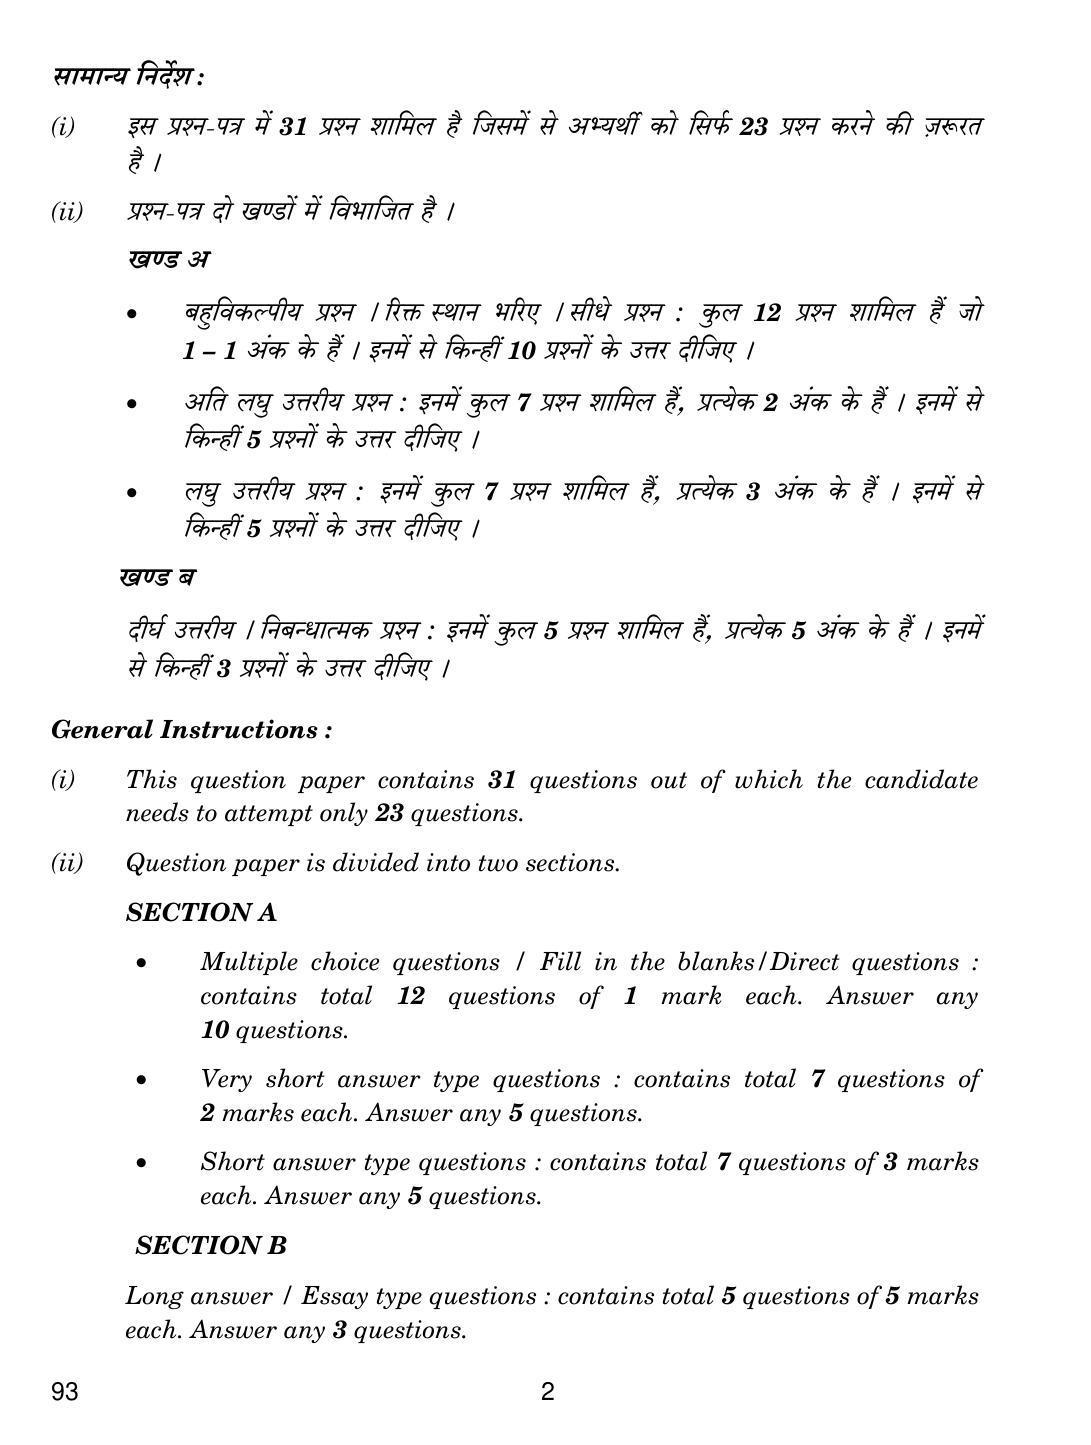 CBSE Class 10 93 INTRODUCTION TO TOURISM 2019 Question Paper - Page 2